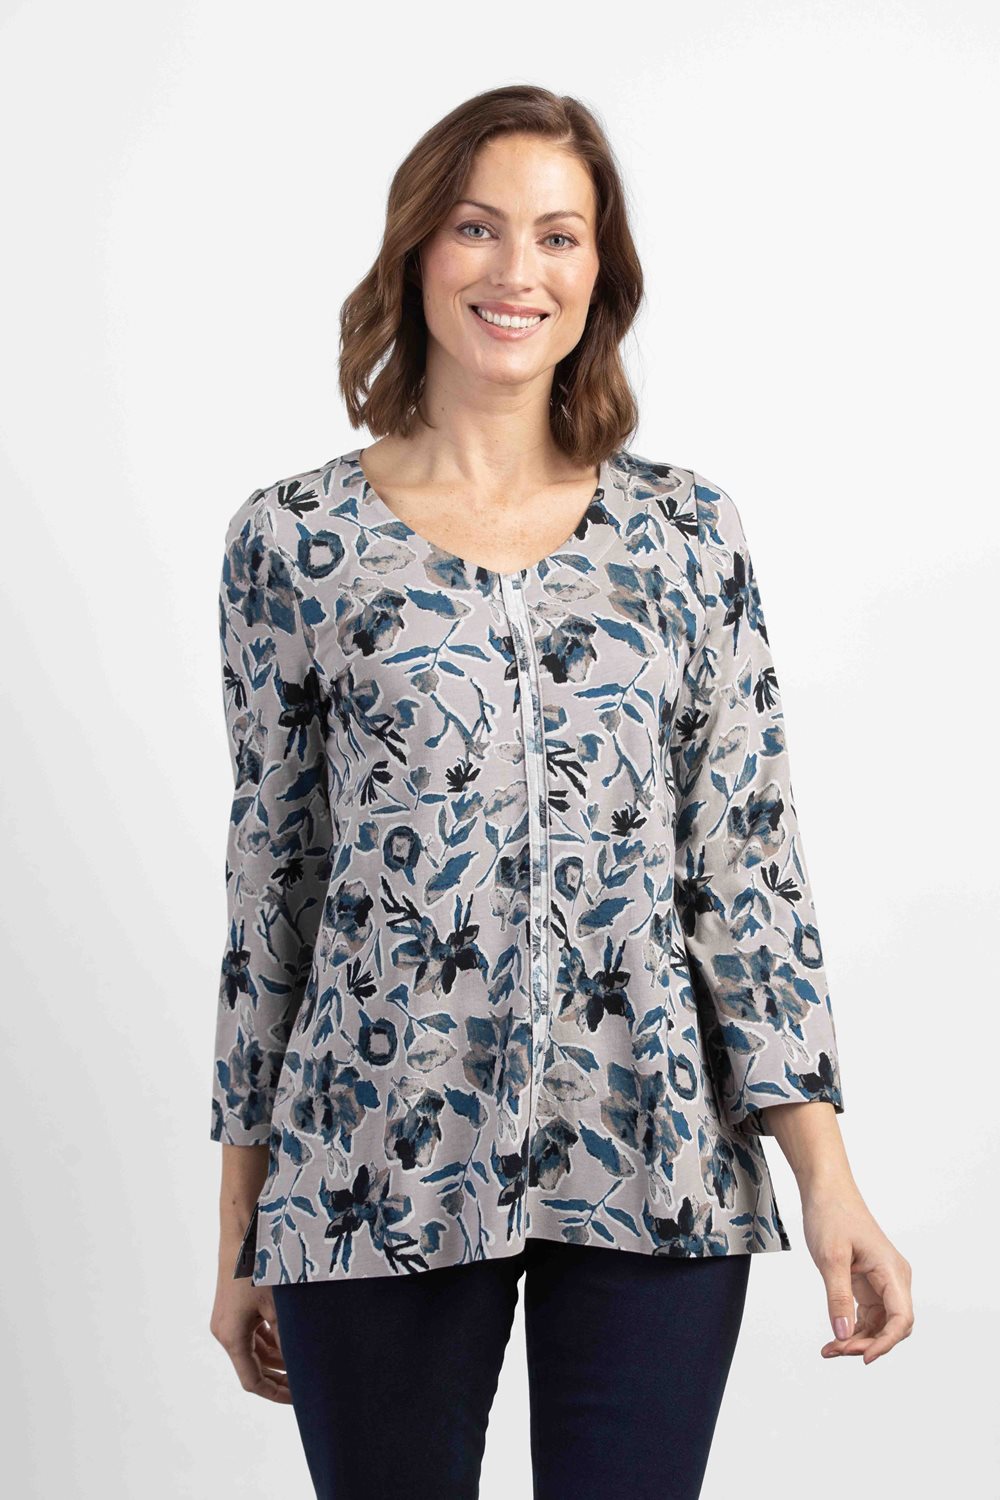 Habitat Cotton Jersey Mirage Top.  Gray with blue and purple floral pattern, seam details, long sleeves and round neckline. Tunic length.